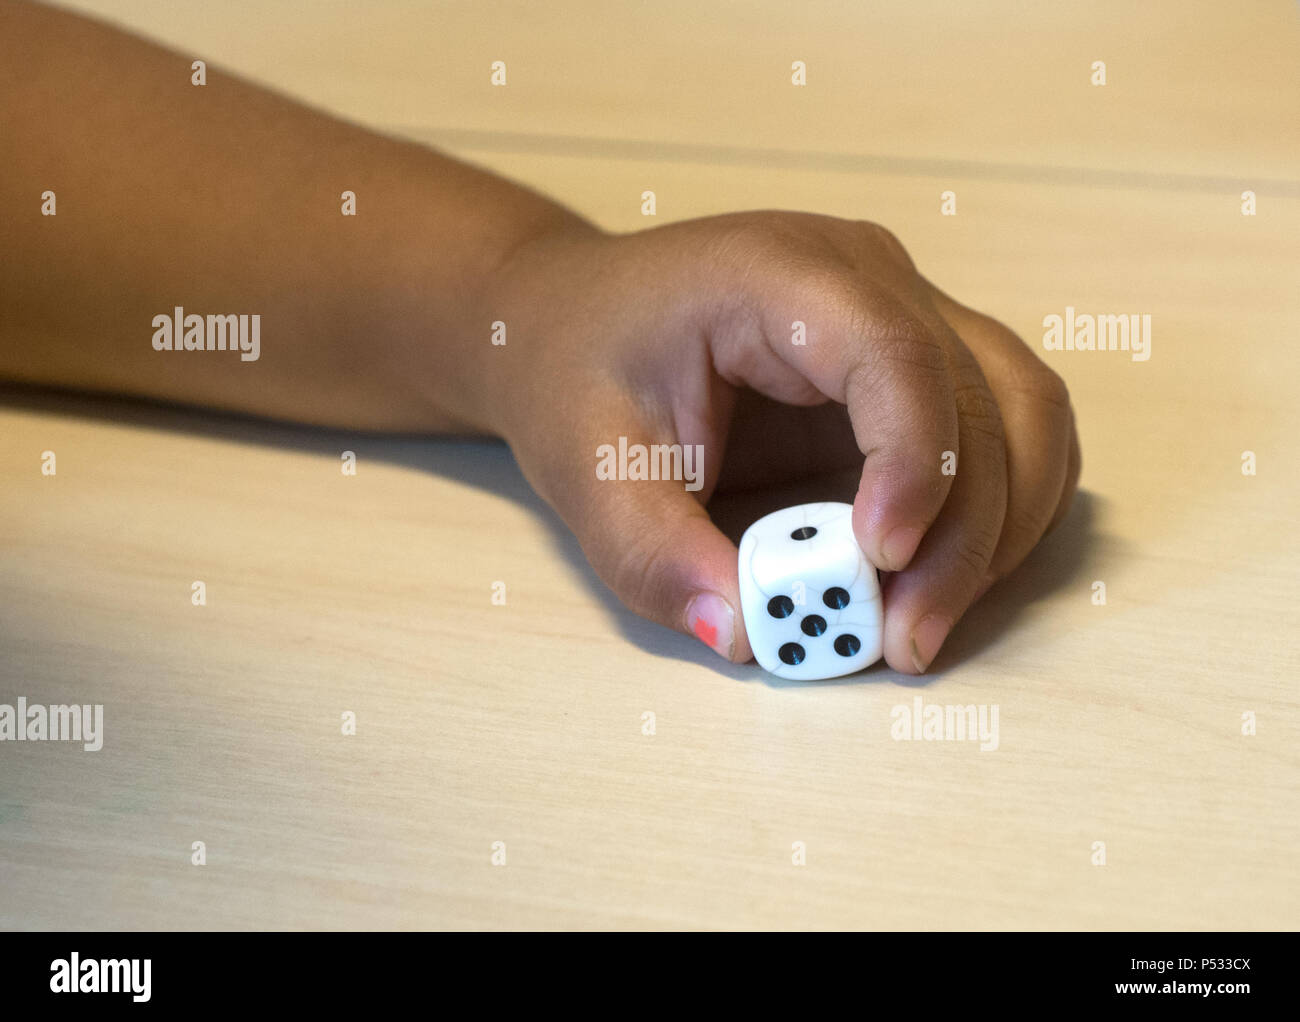 Children playing with a dice Stock Photo